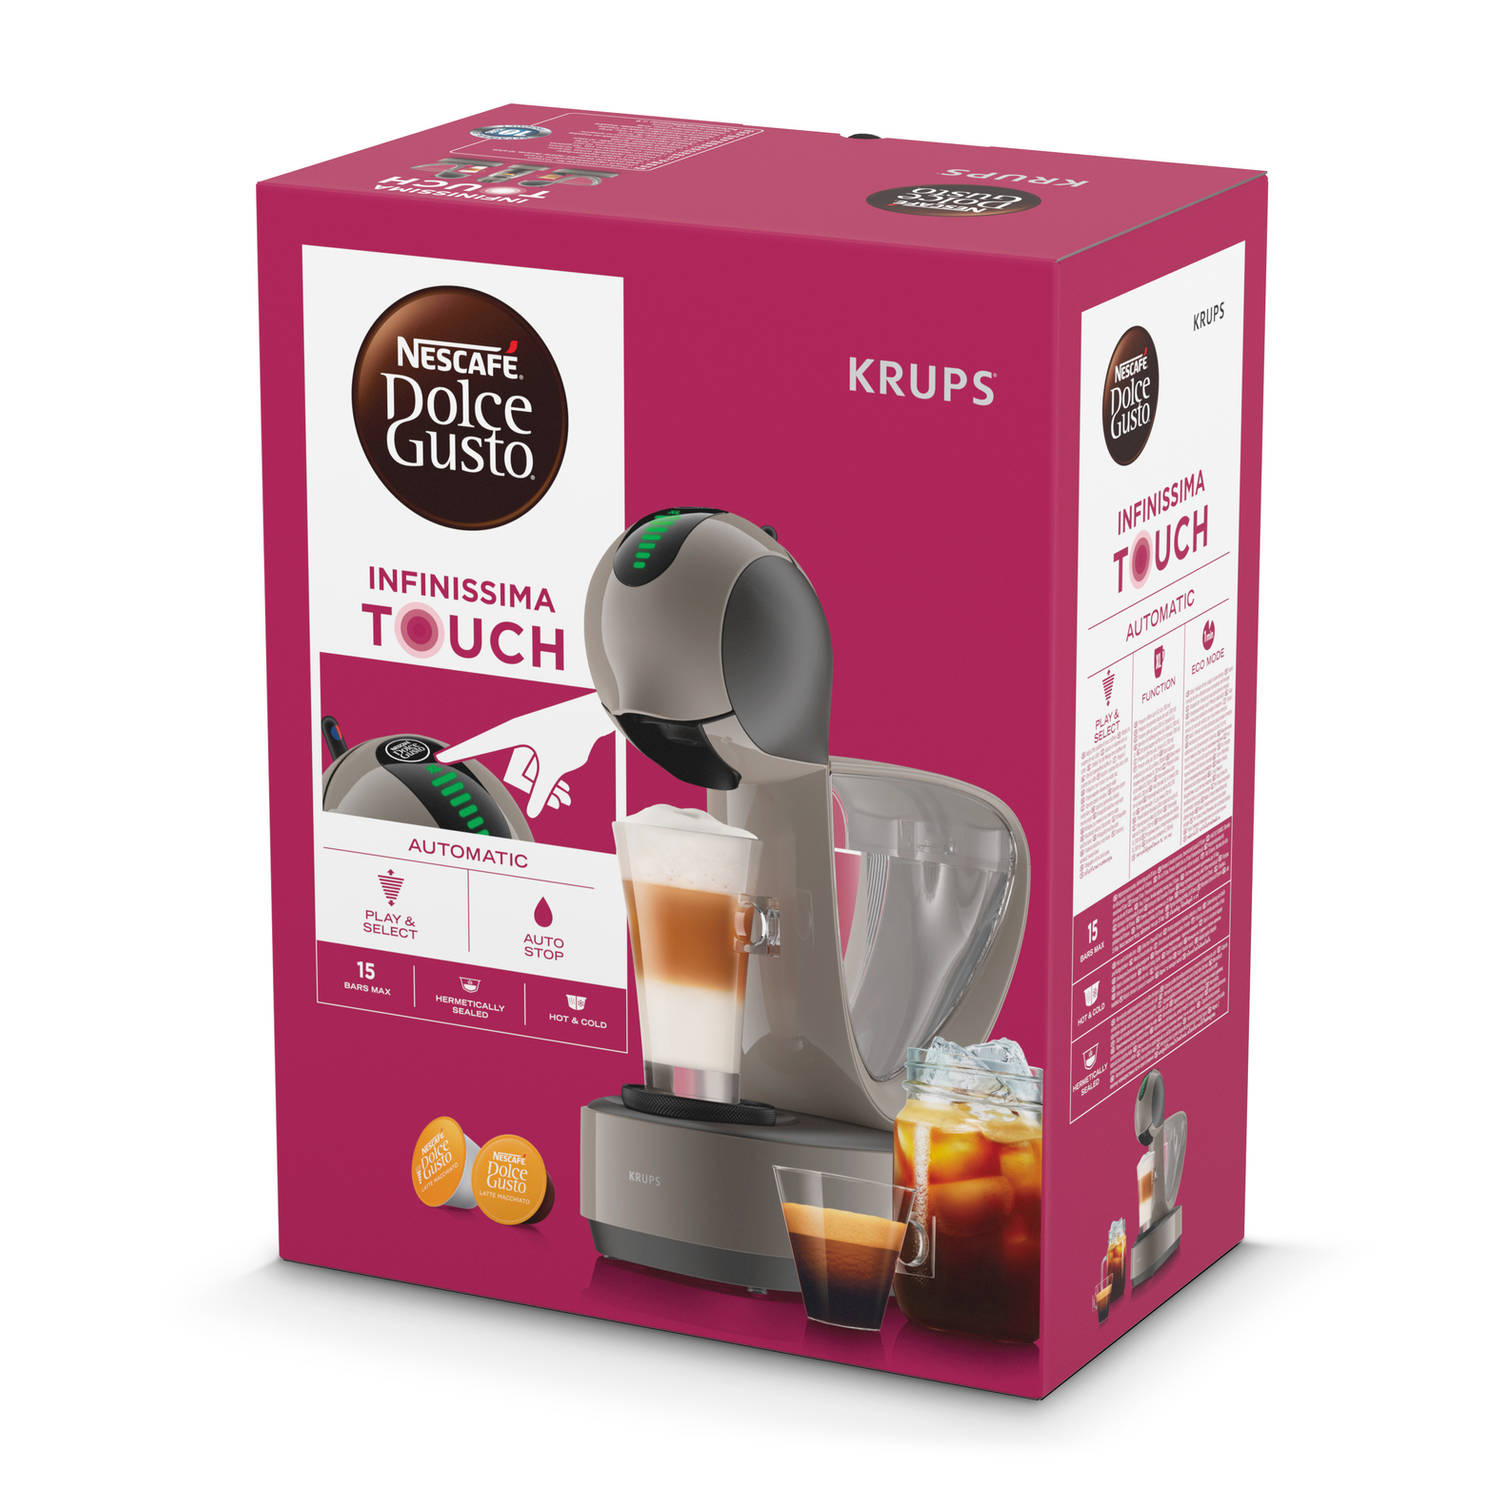 Gusto Automatische Krups KP270A Taupe Dolce NESCAFÉ koffiemachine | Blokker Infinissima - Touch